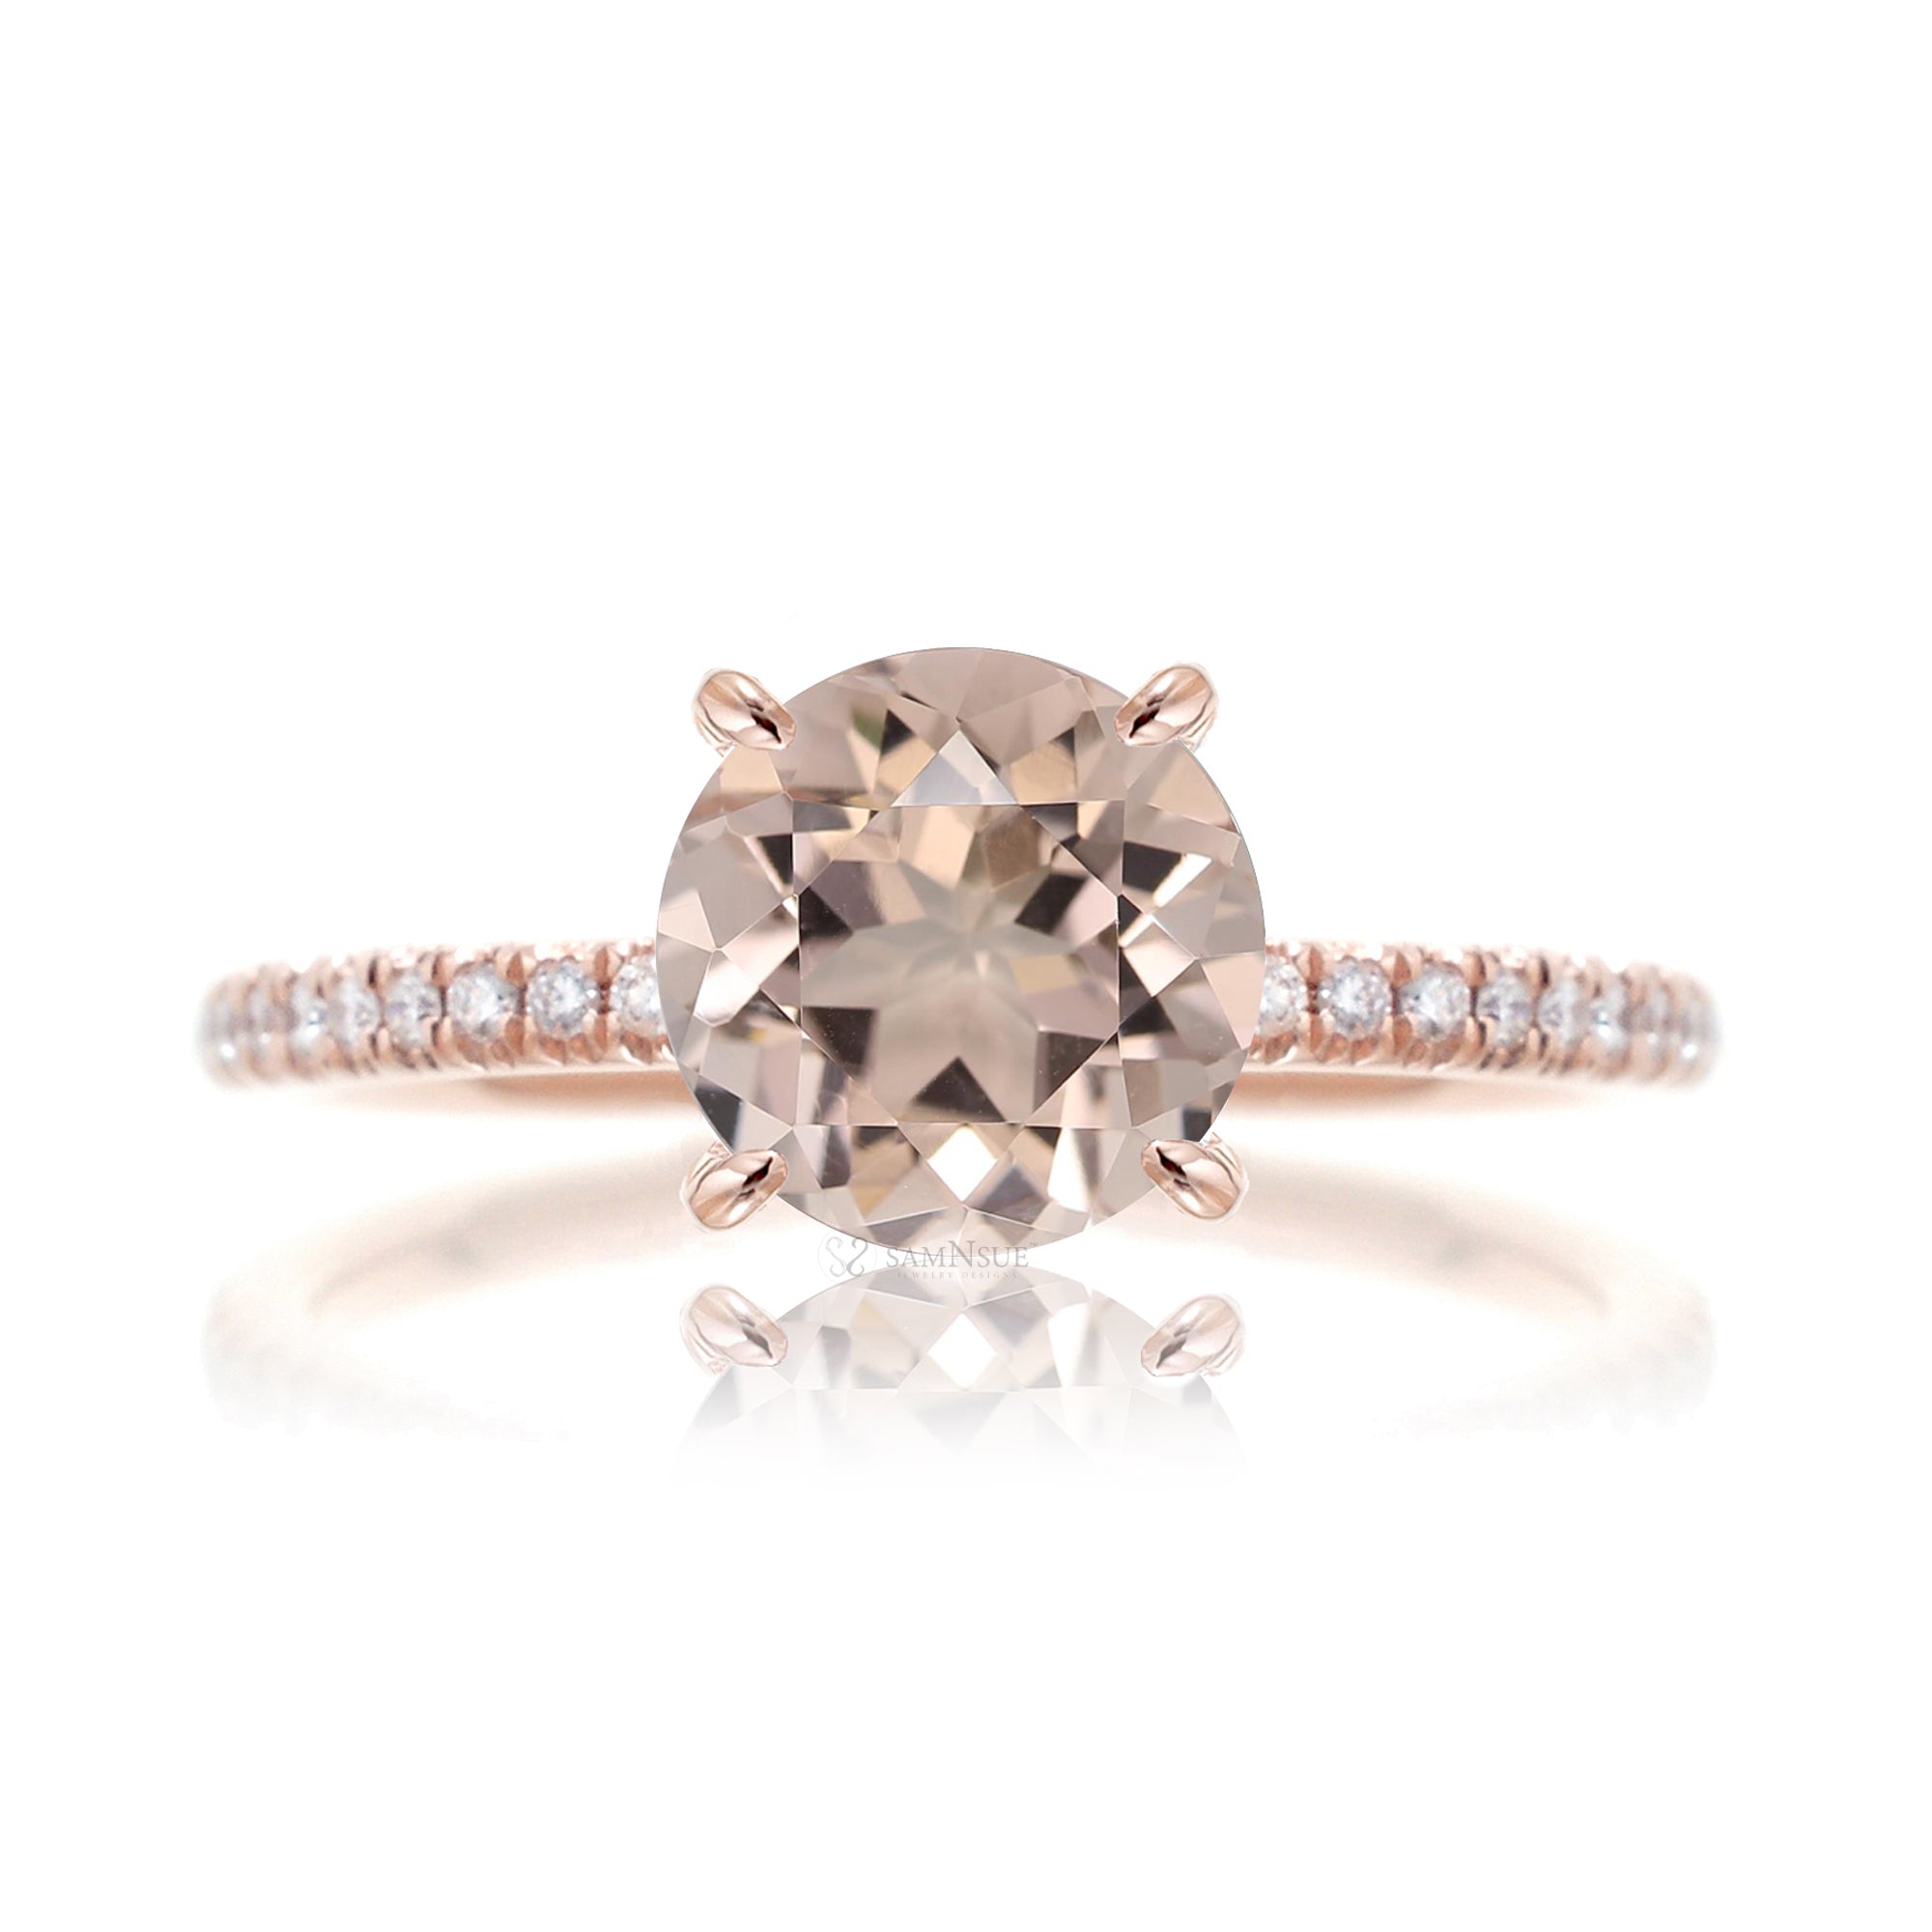 Round morganite diamond band ring in rose gold - The Ava